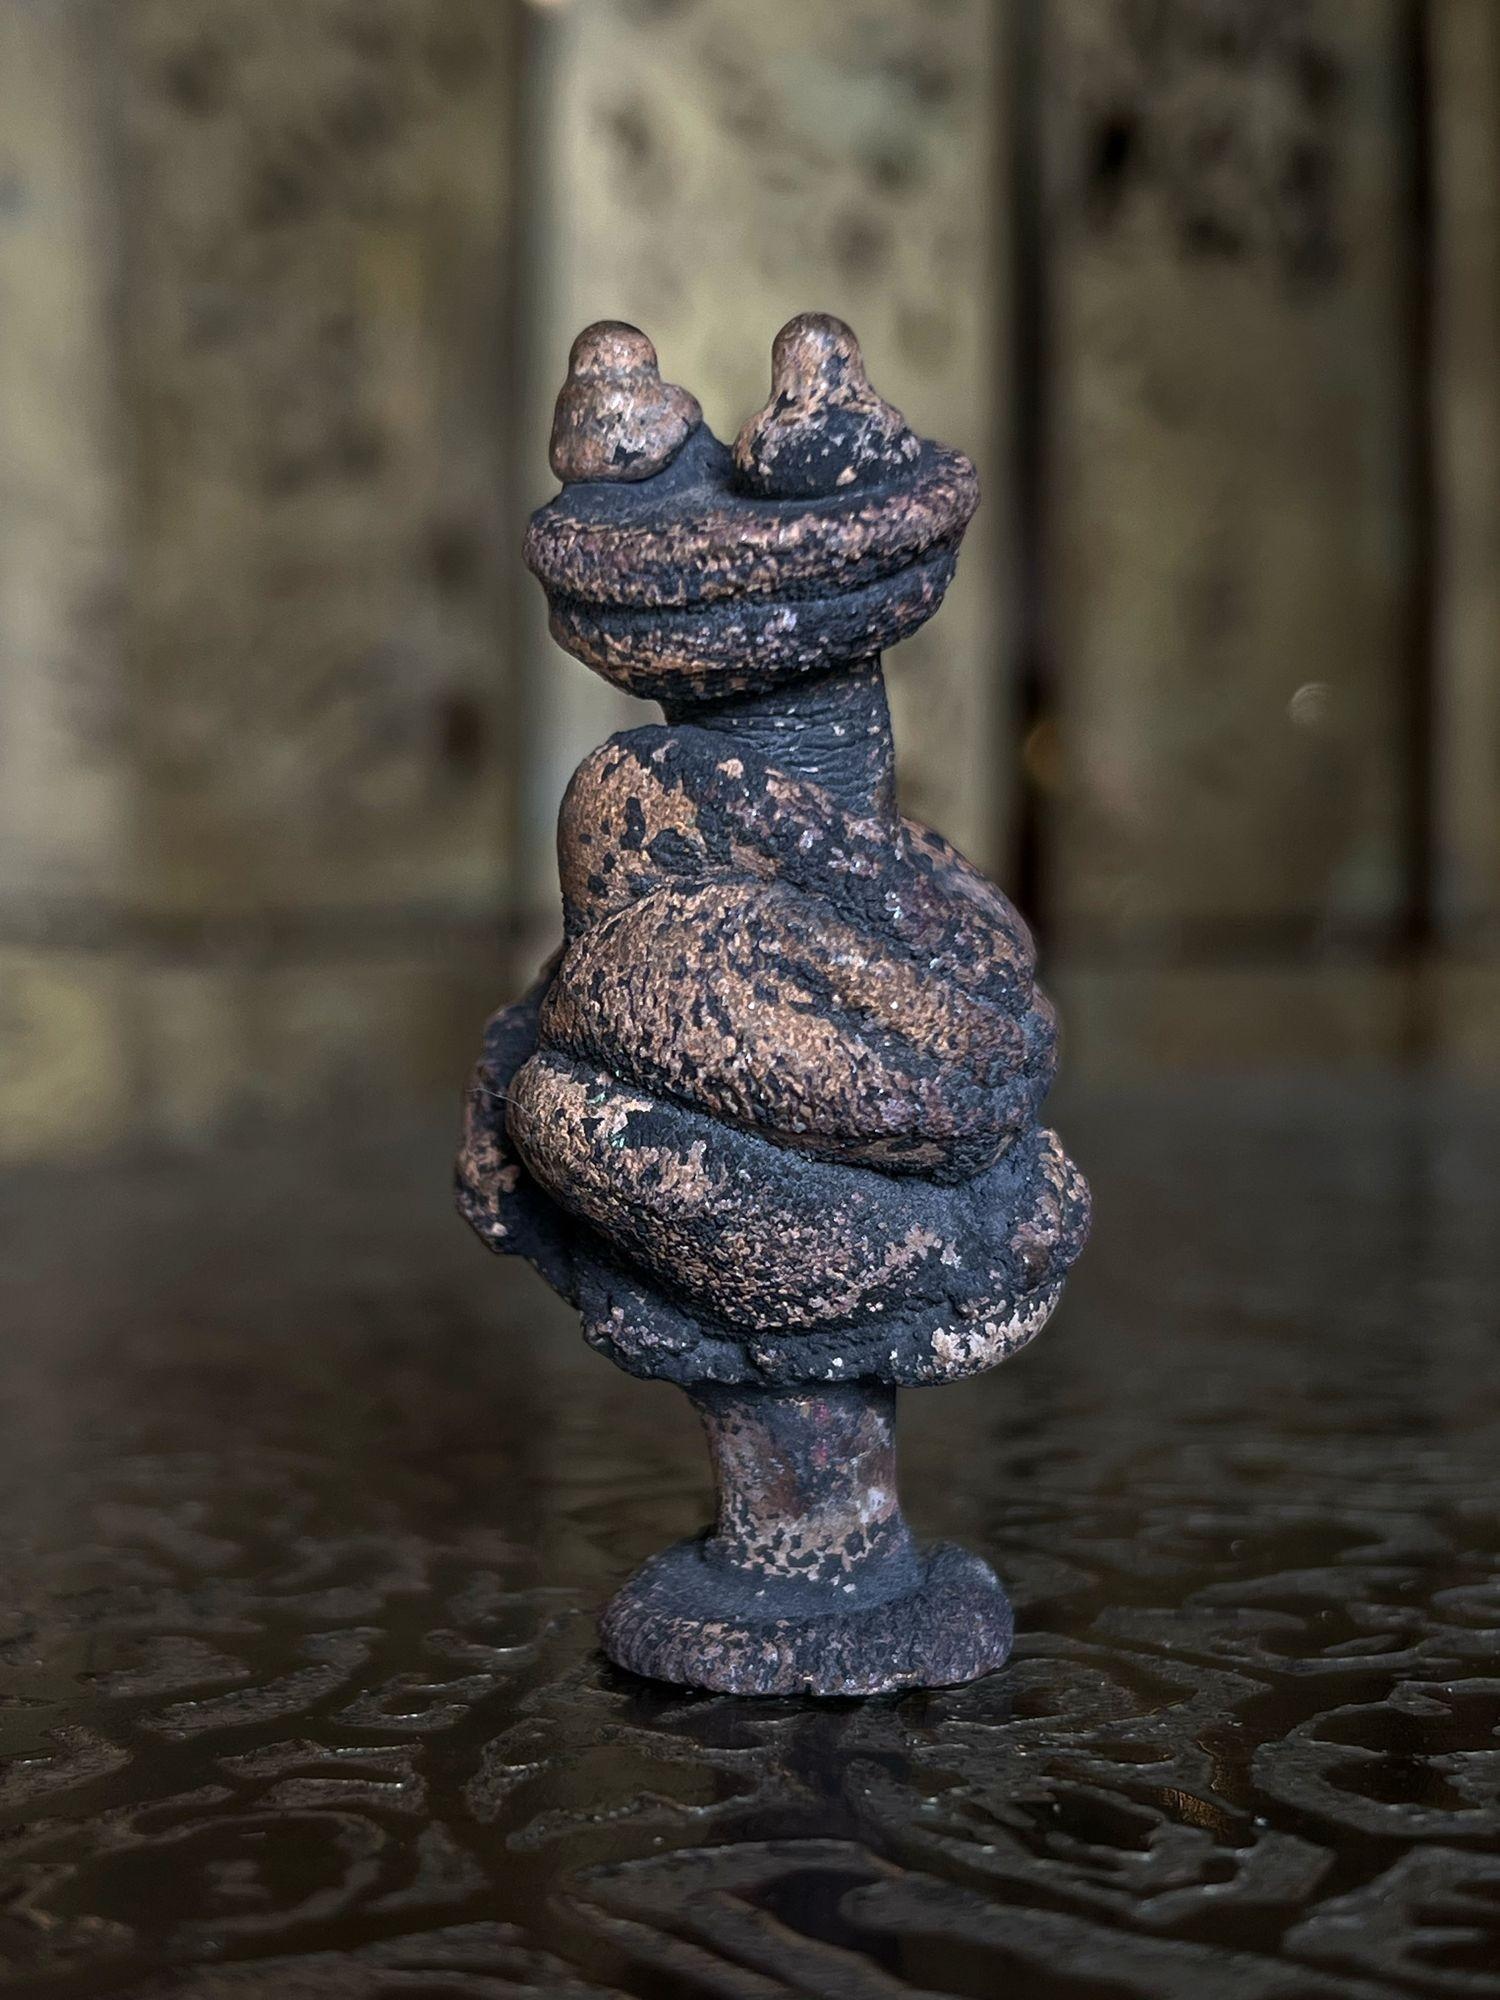 A figurative vertical form with two protrusions on top constructed of melt pressed bronze (heated numerous times, squeezed, and shaped. Includes provenance and hand-signed COA from the Bertoia Foundation.